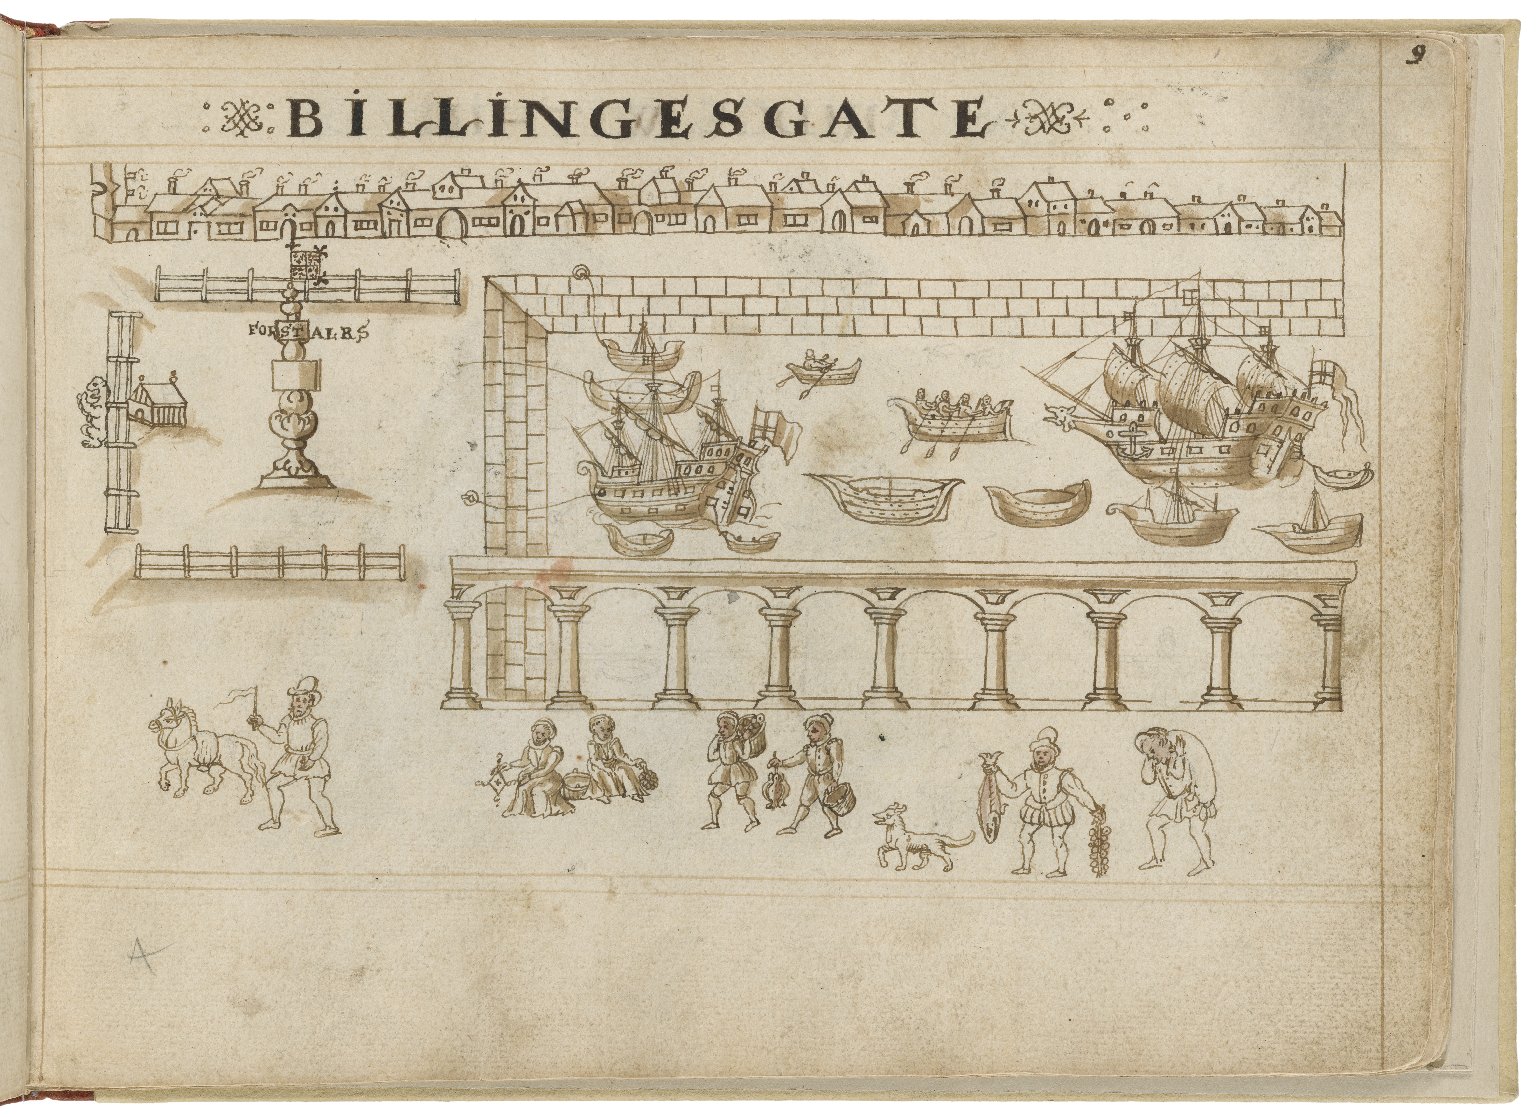 Drawing of Billingsgate by Hugh Alley. Image courtesy of the Folger Digital Image Collection.